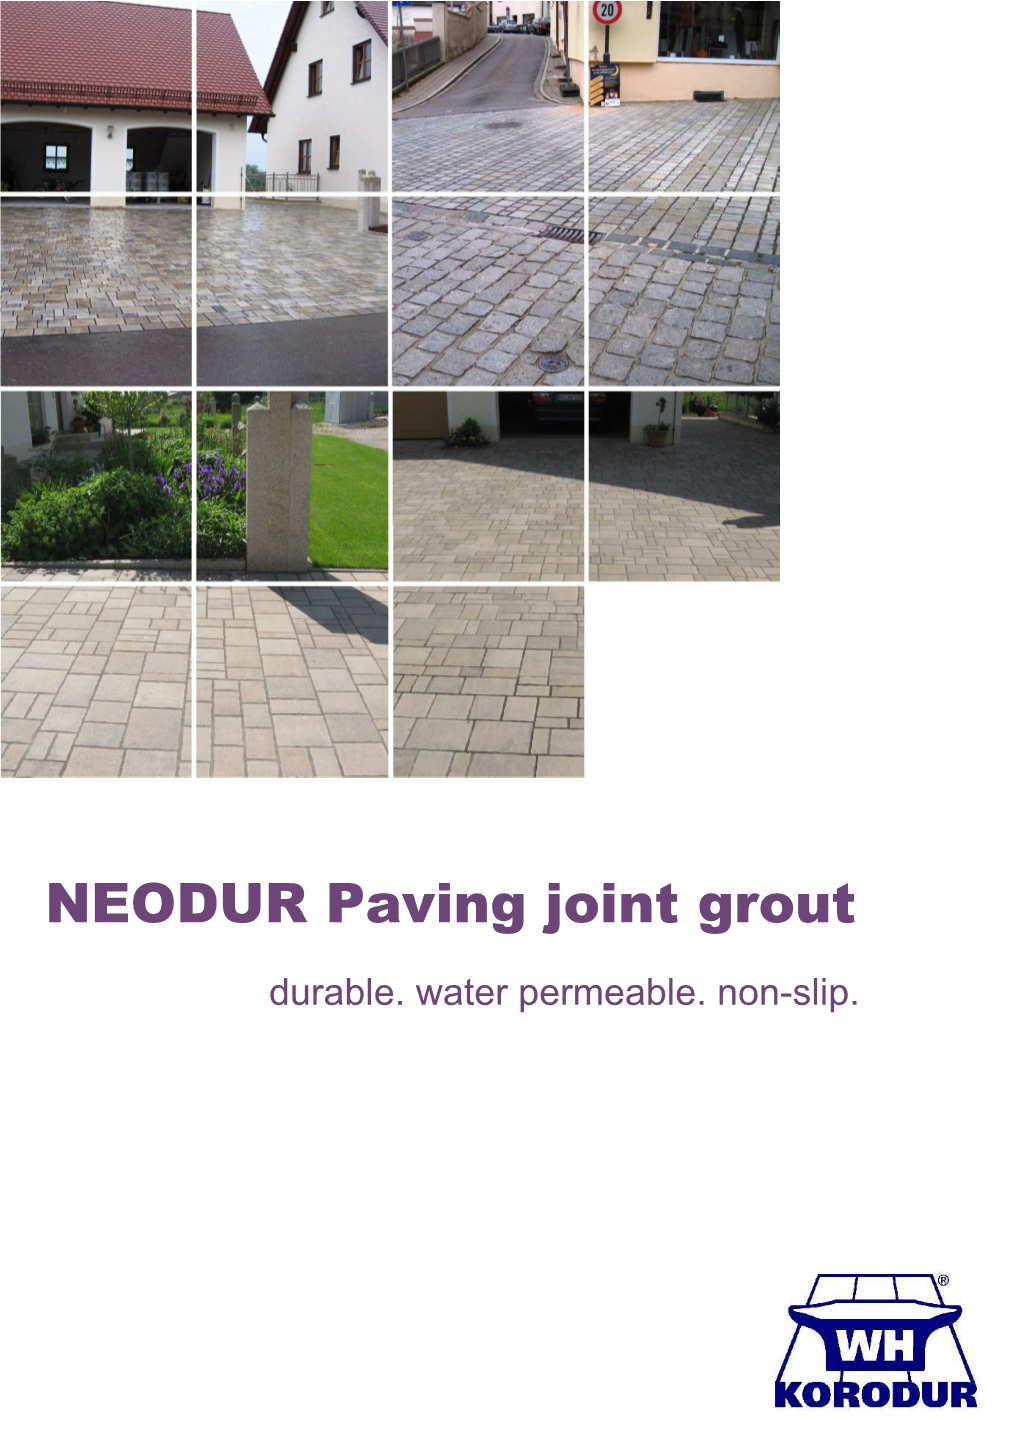 NEODUR Paving Joint Grout